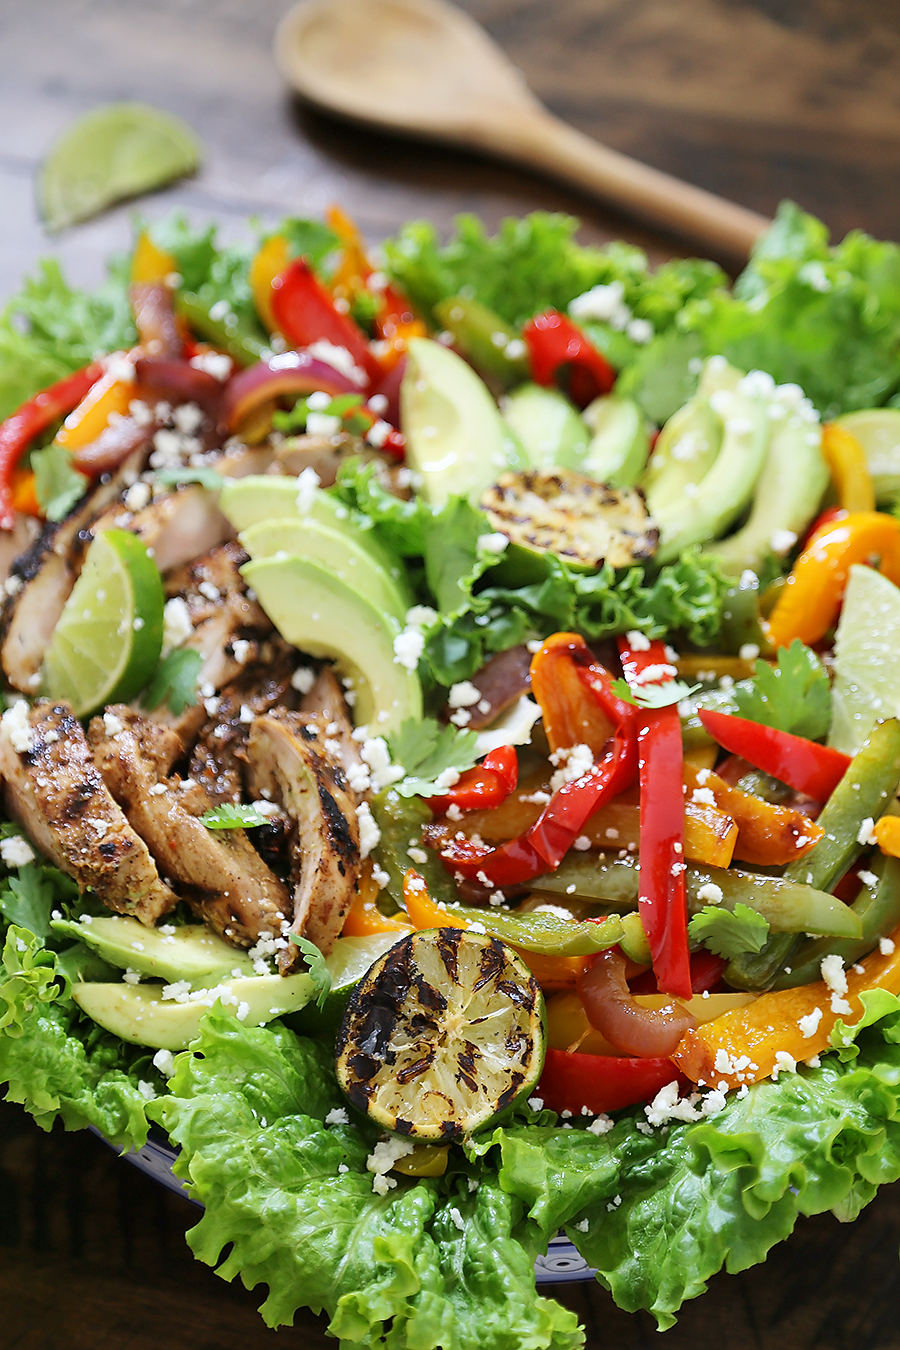 Grilled Chili-Lime Chicken Fajita Salad - Tender, juicy marinated chicken with fresh bell peppers, onions, garlic and avocado slices. SO good. Top with some creamy queso fresco and cilantro for extra eye appeal and flavor! thecomfortofcooking.com